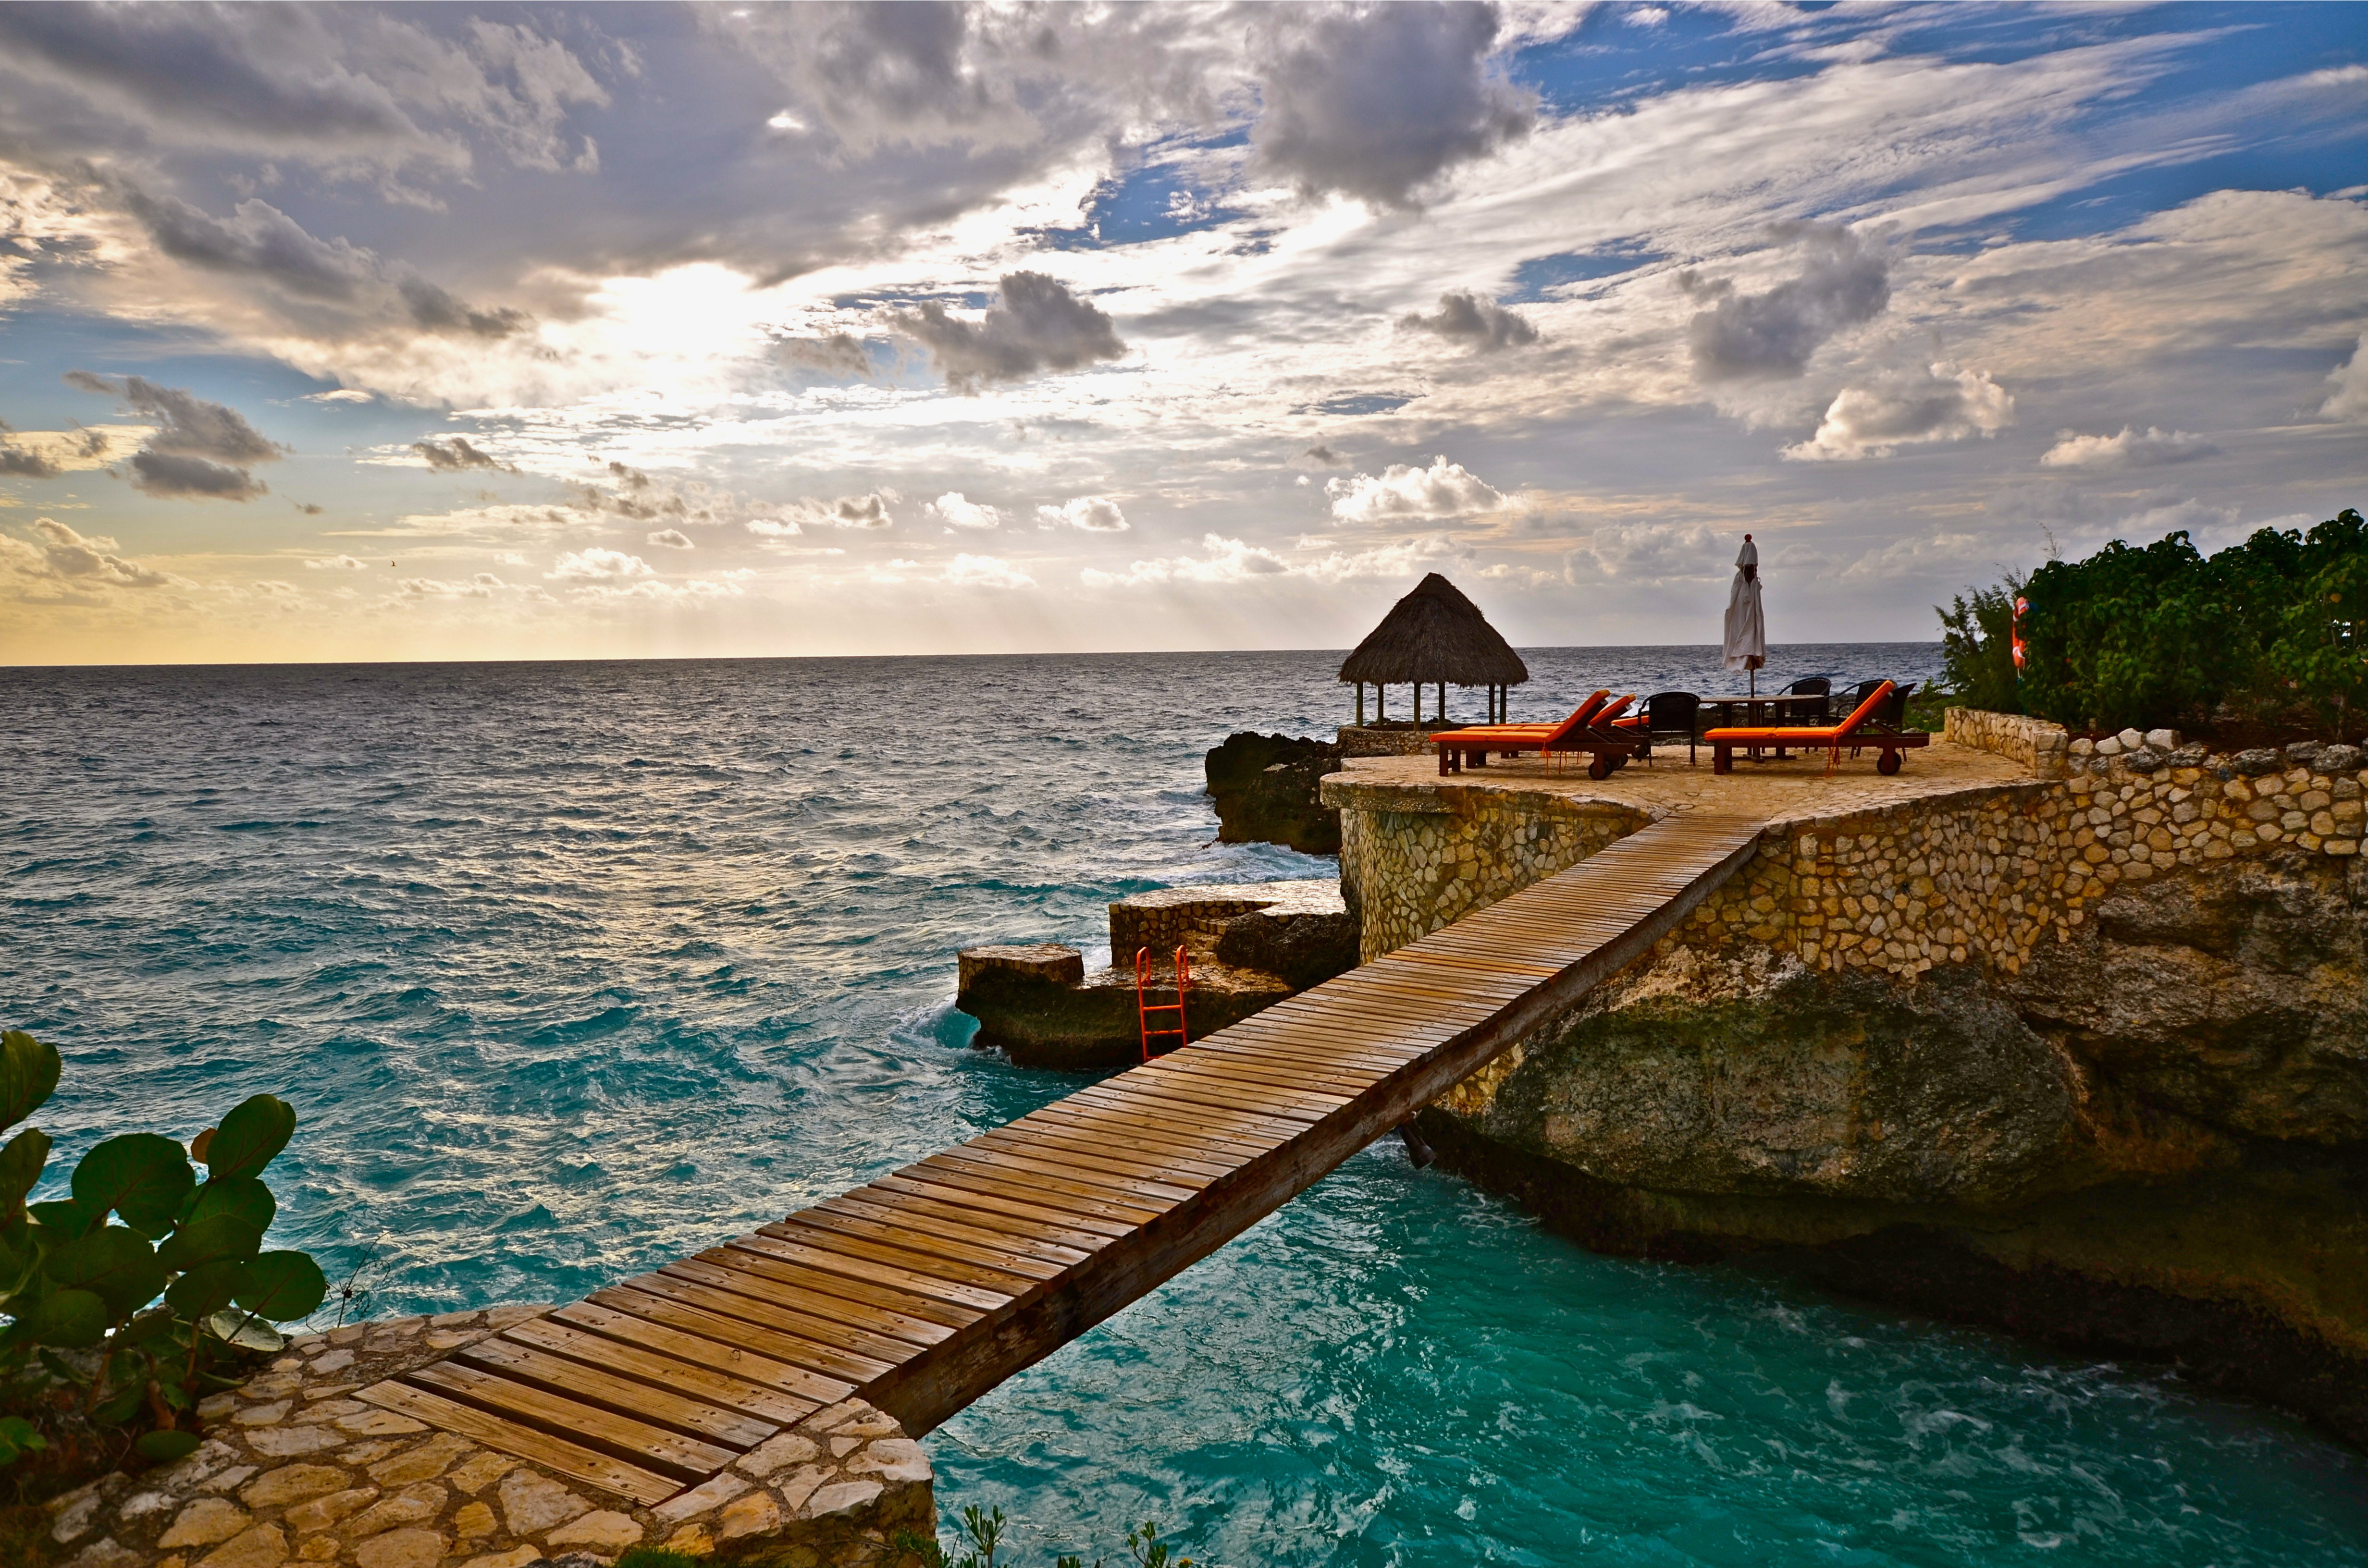 Bridge on one of the best resorts in Jamaica pictured at sunset with a patio overlooking the ocean